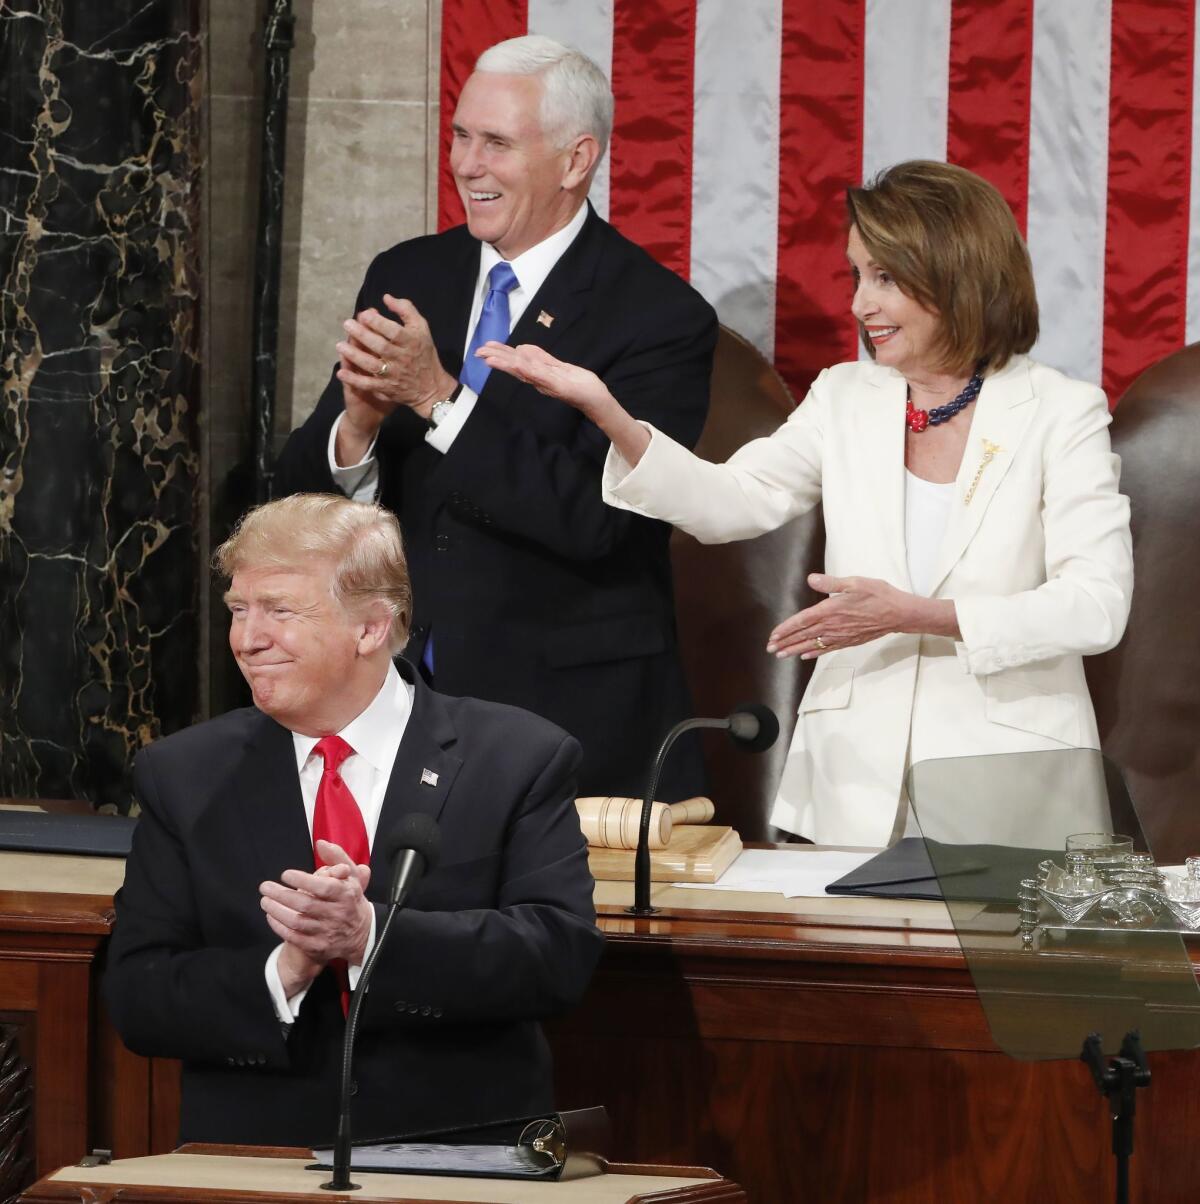 Vice President Mike Pence, clockwise, and Speaker of the House Nancy Pelosi react as President Trump delivers his second State of the Union address from the floor of the House of Representatives at the Capitol in Washington D.C.